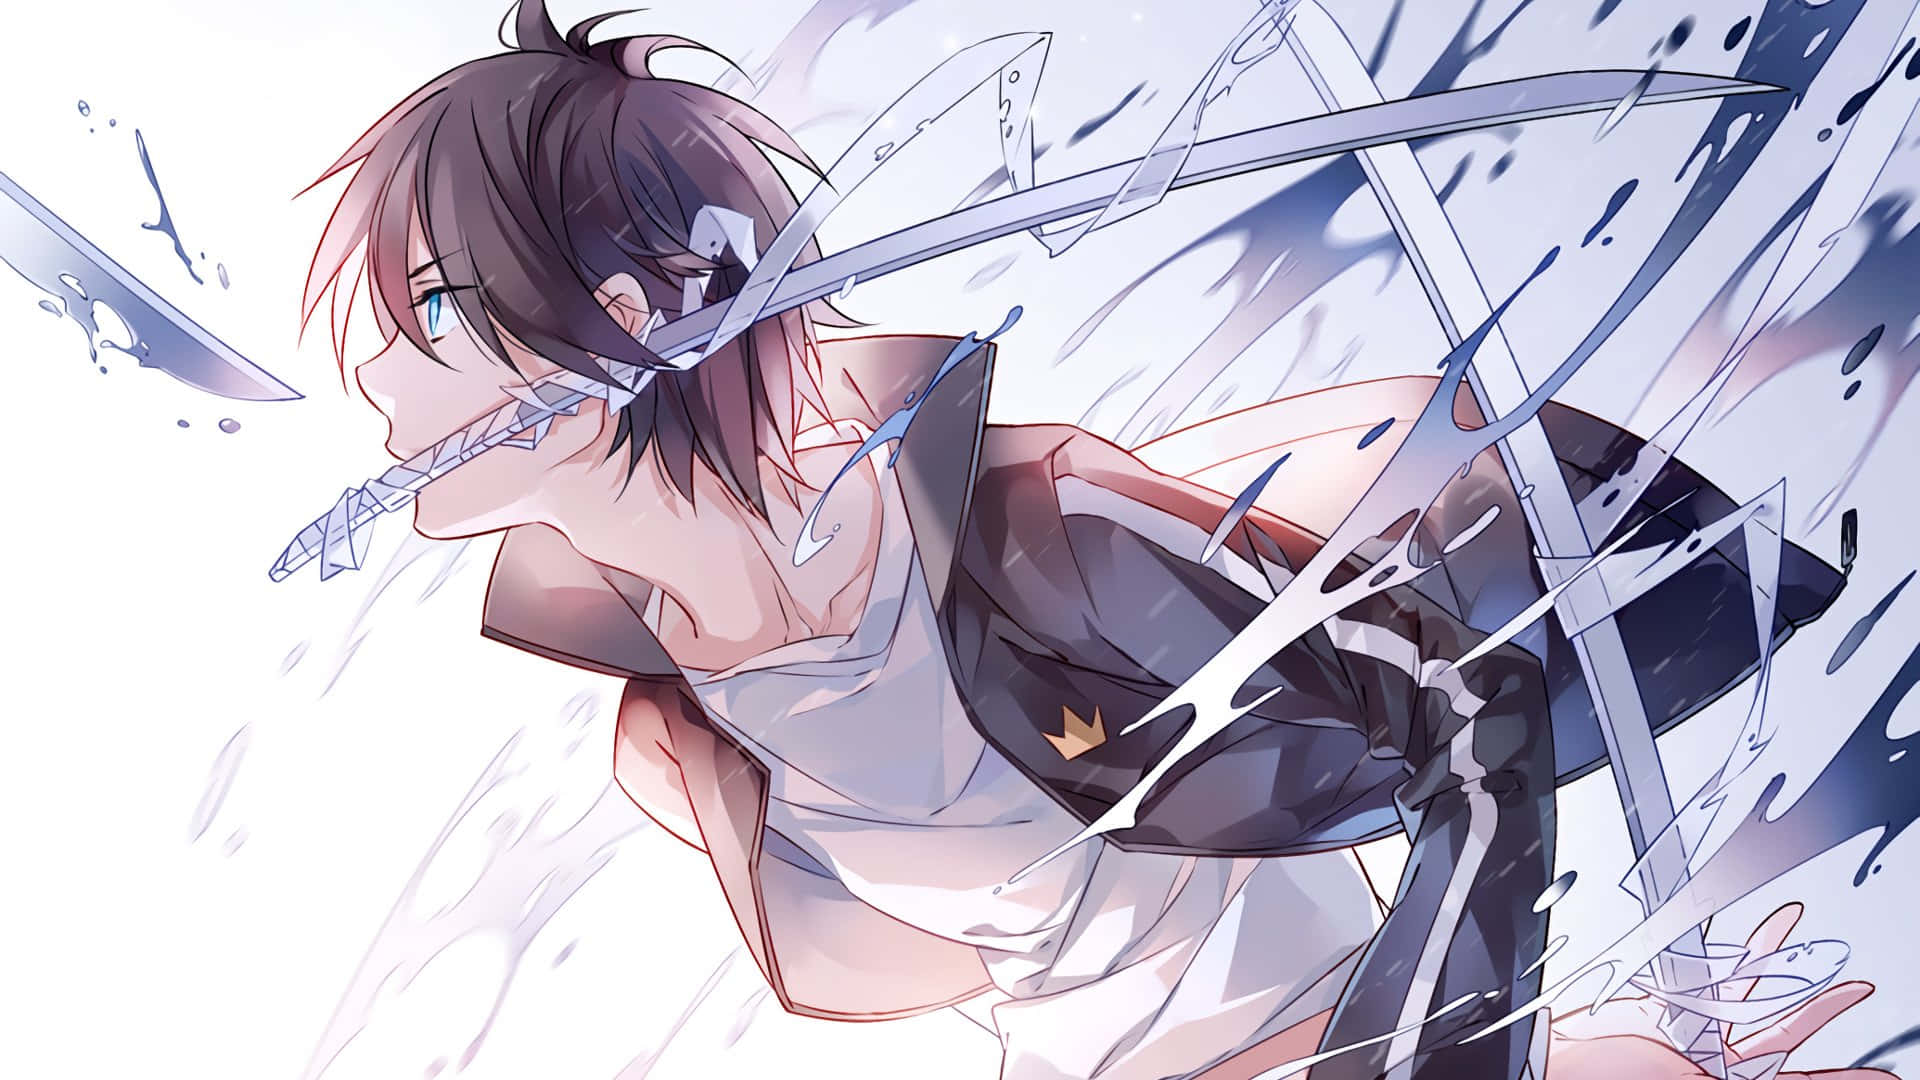 : "Yatos and Regalias of Noragami coming together to form an unstoppable team!"